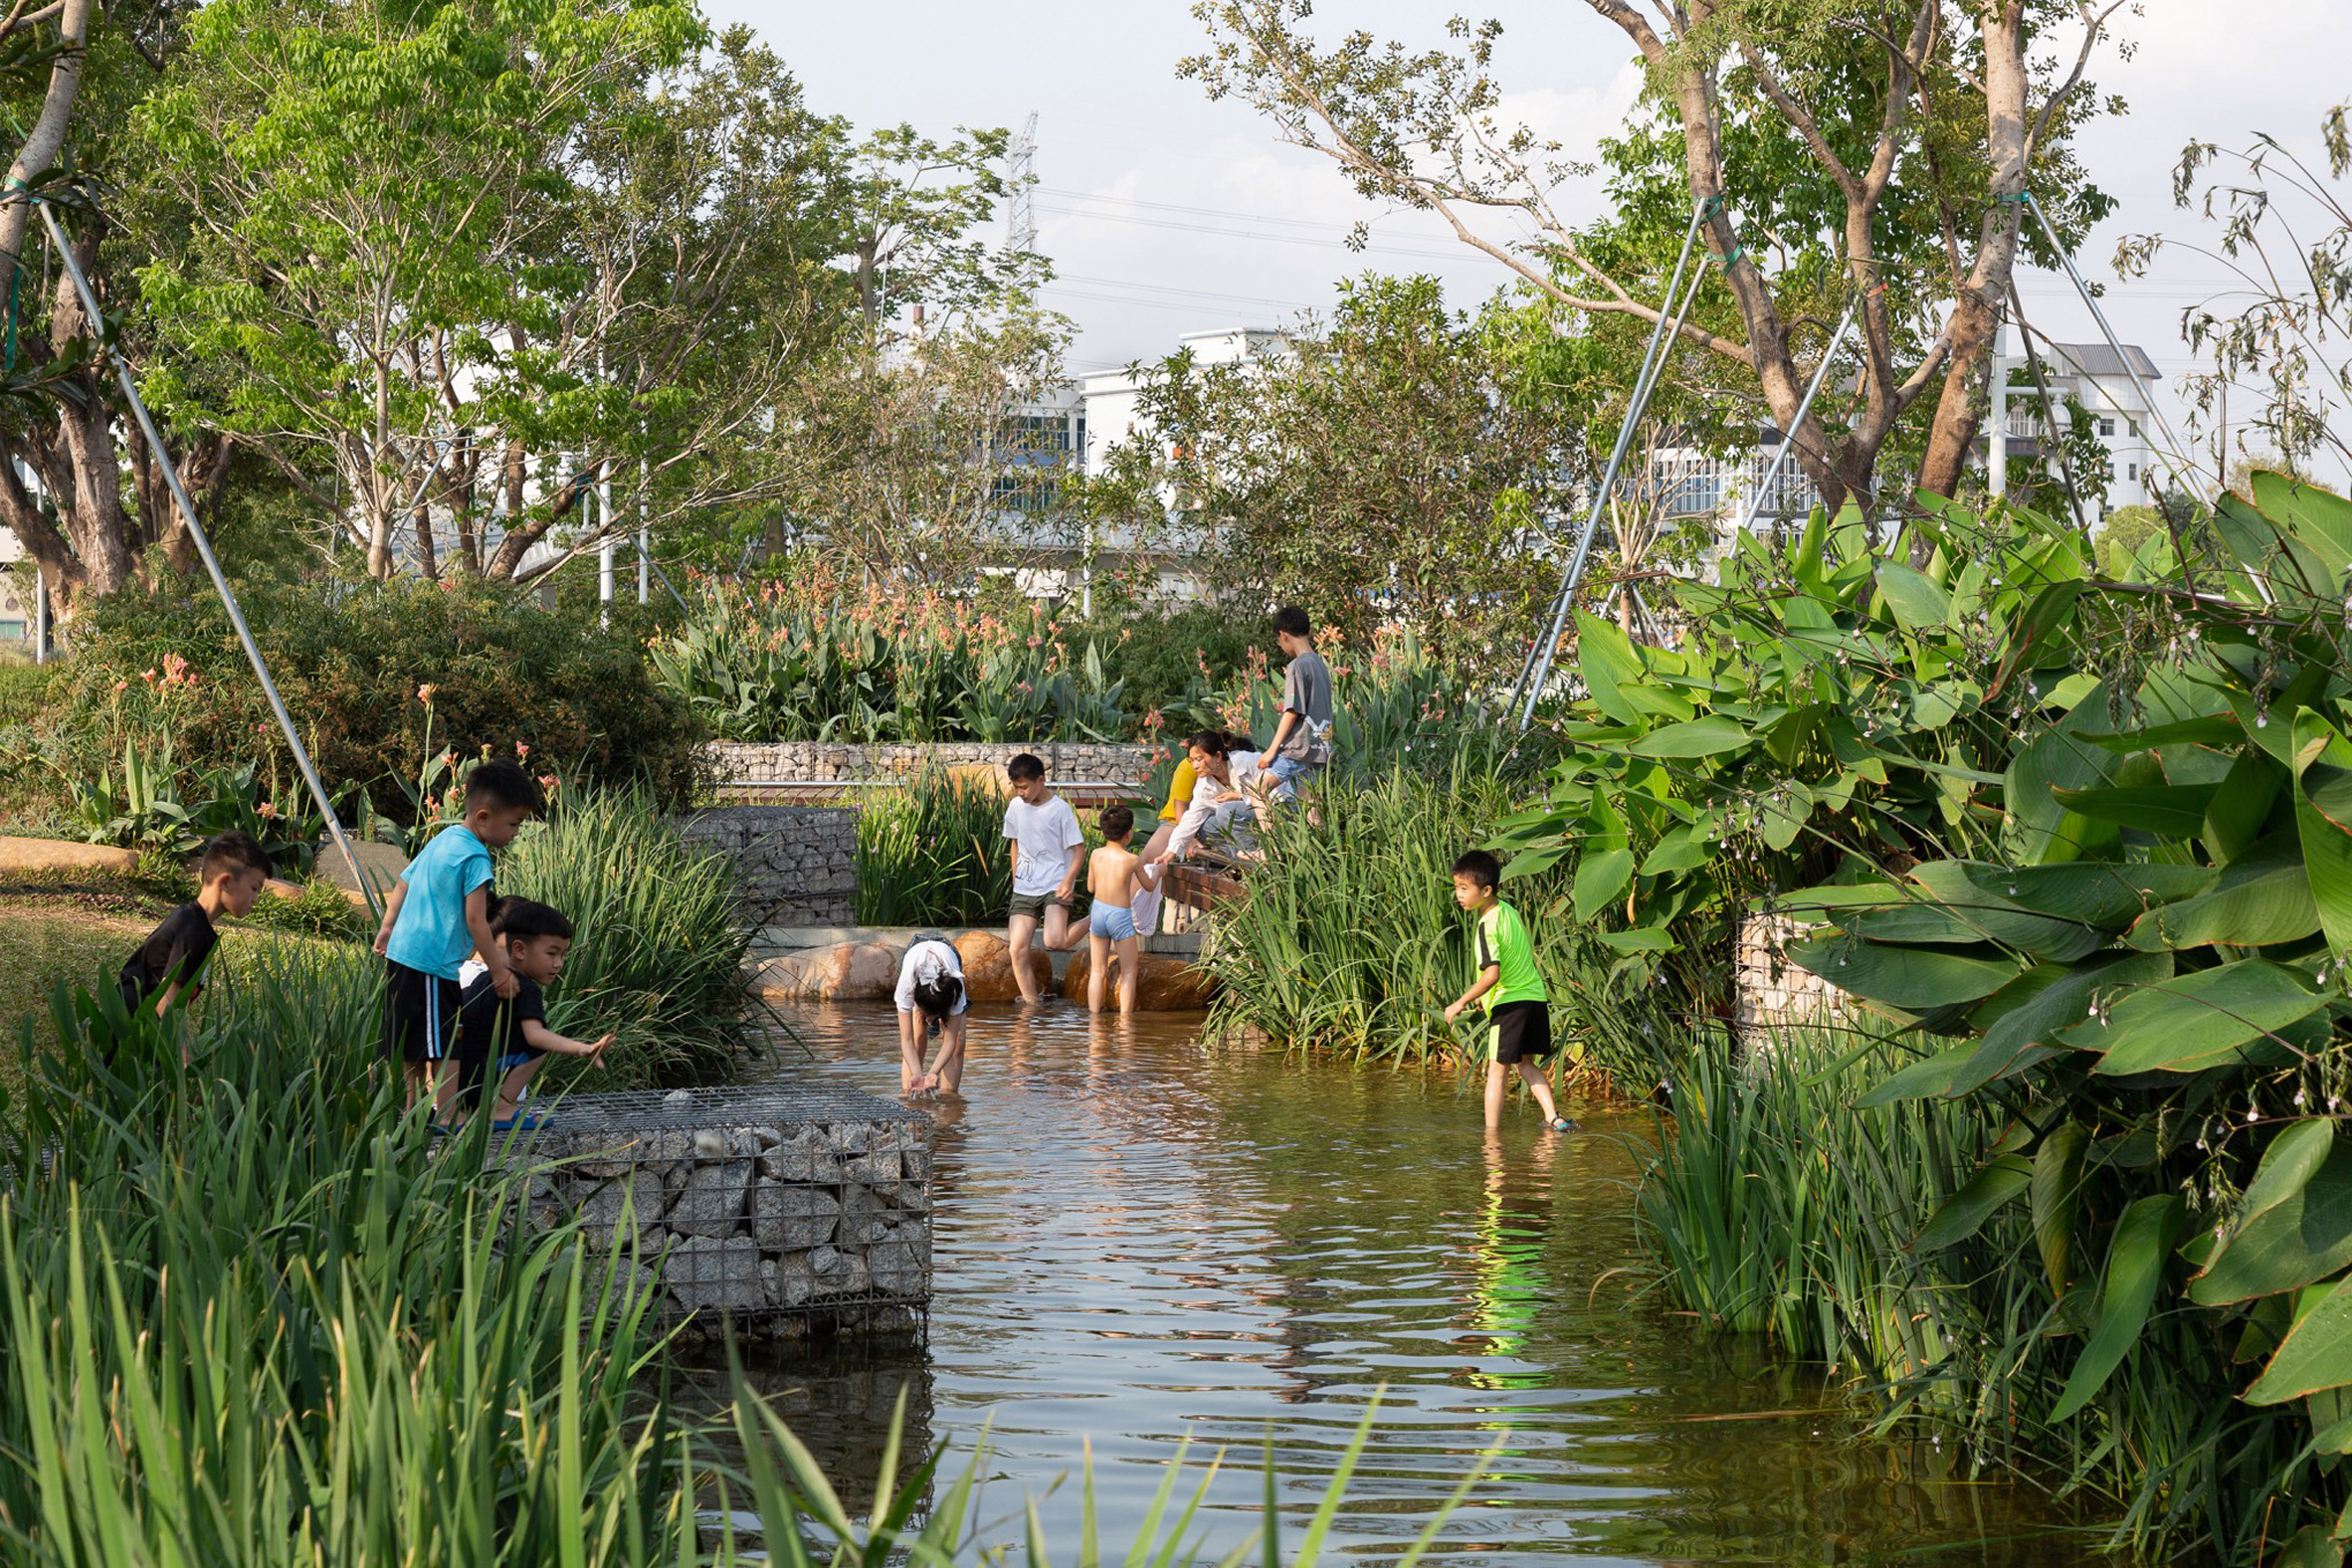 Children are pictured playing in streams at Haoxiang Lake Park